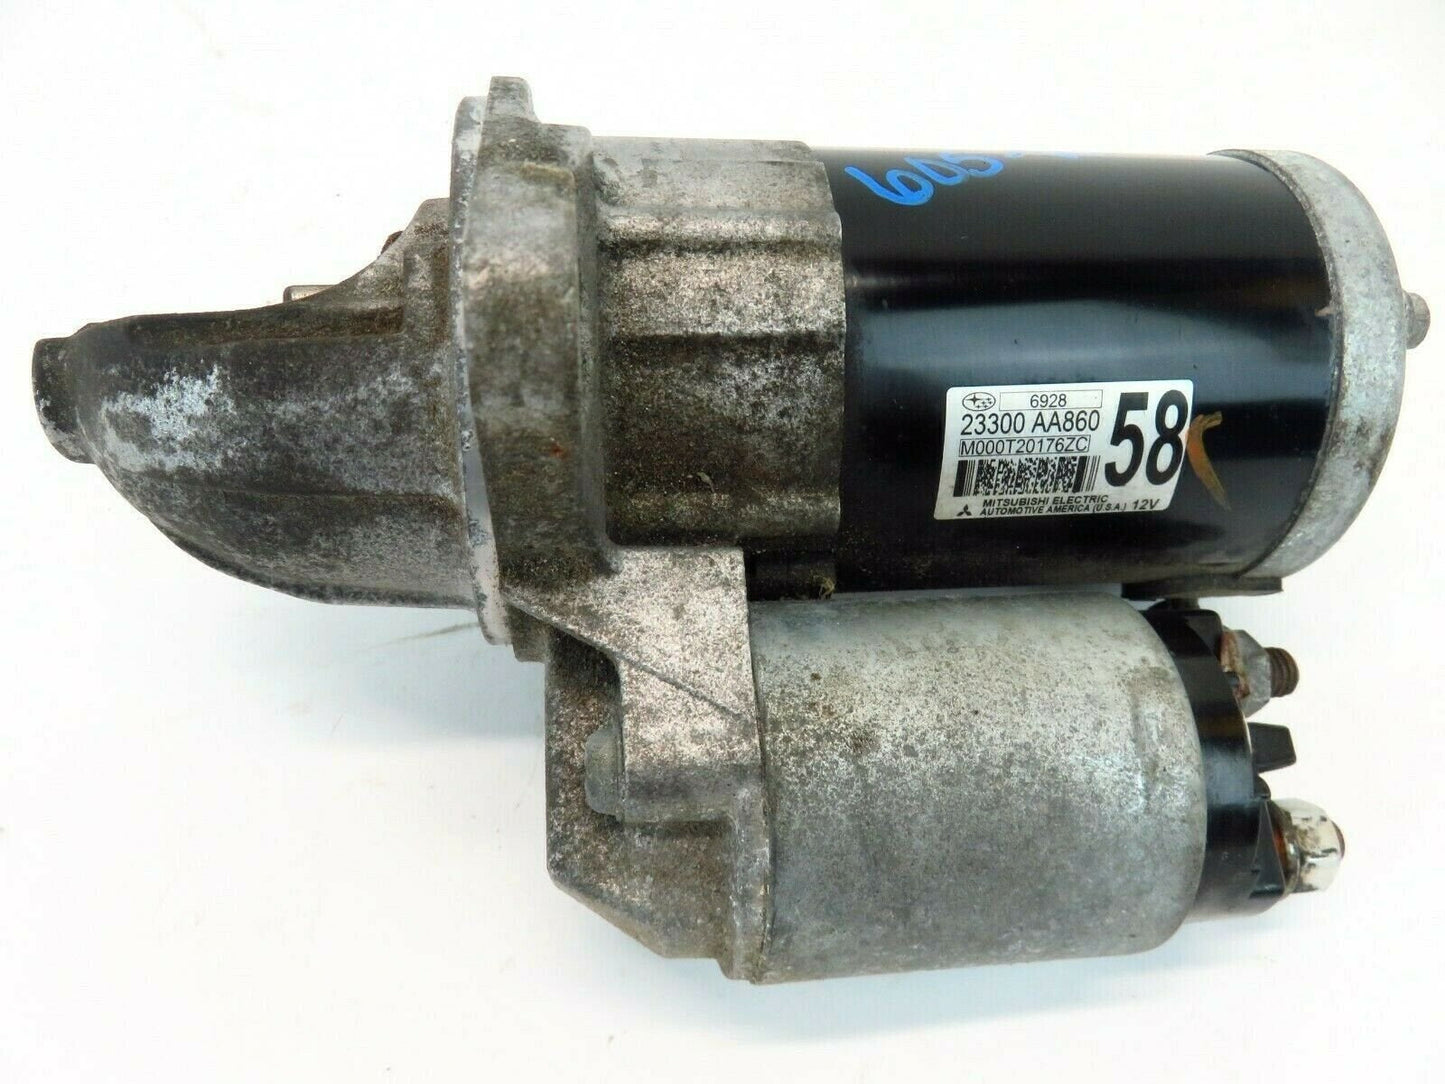 2016-19 Subaru Legacy Outback Starter Motor Assembly 3.6L Engine 23300AA860